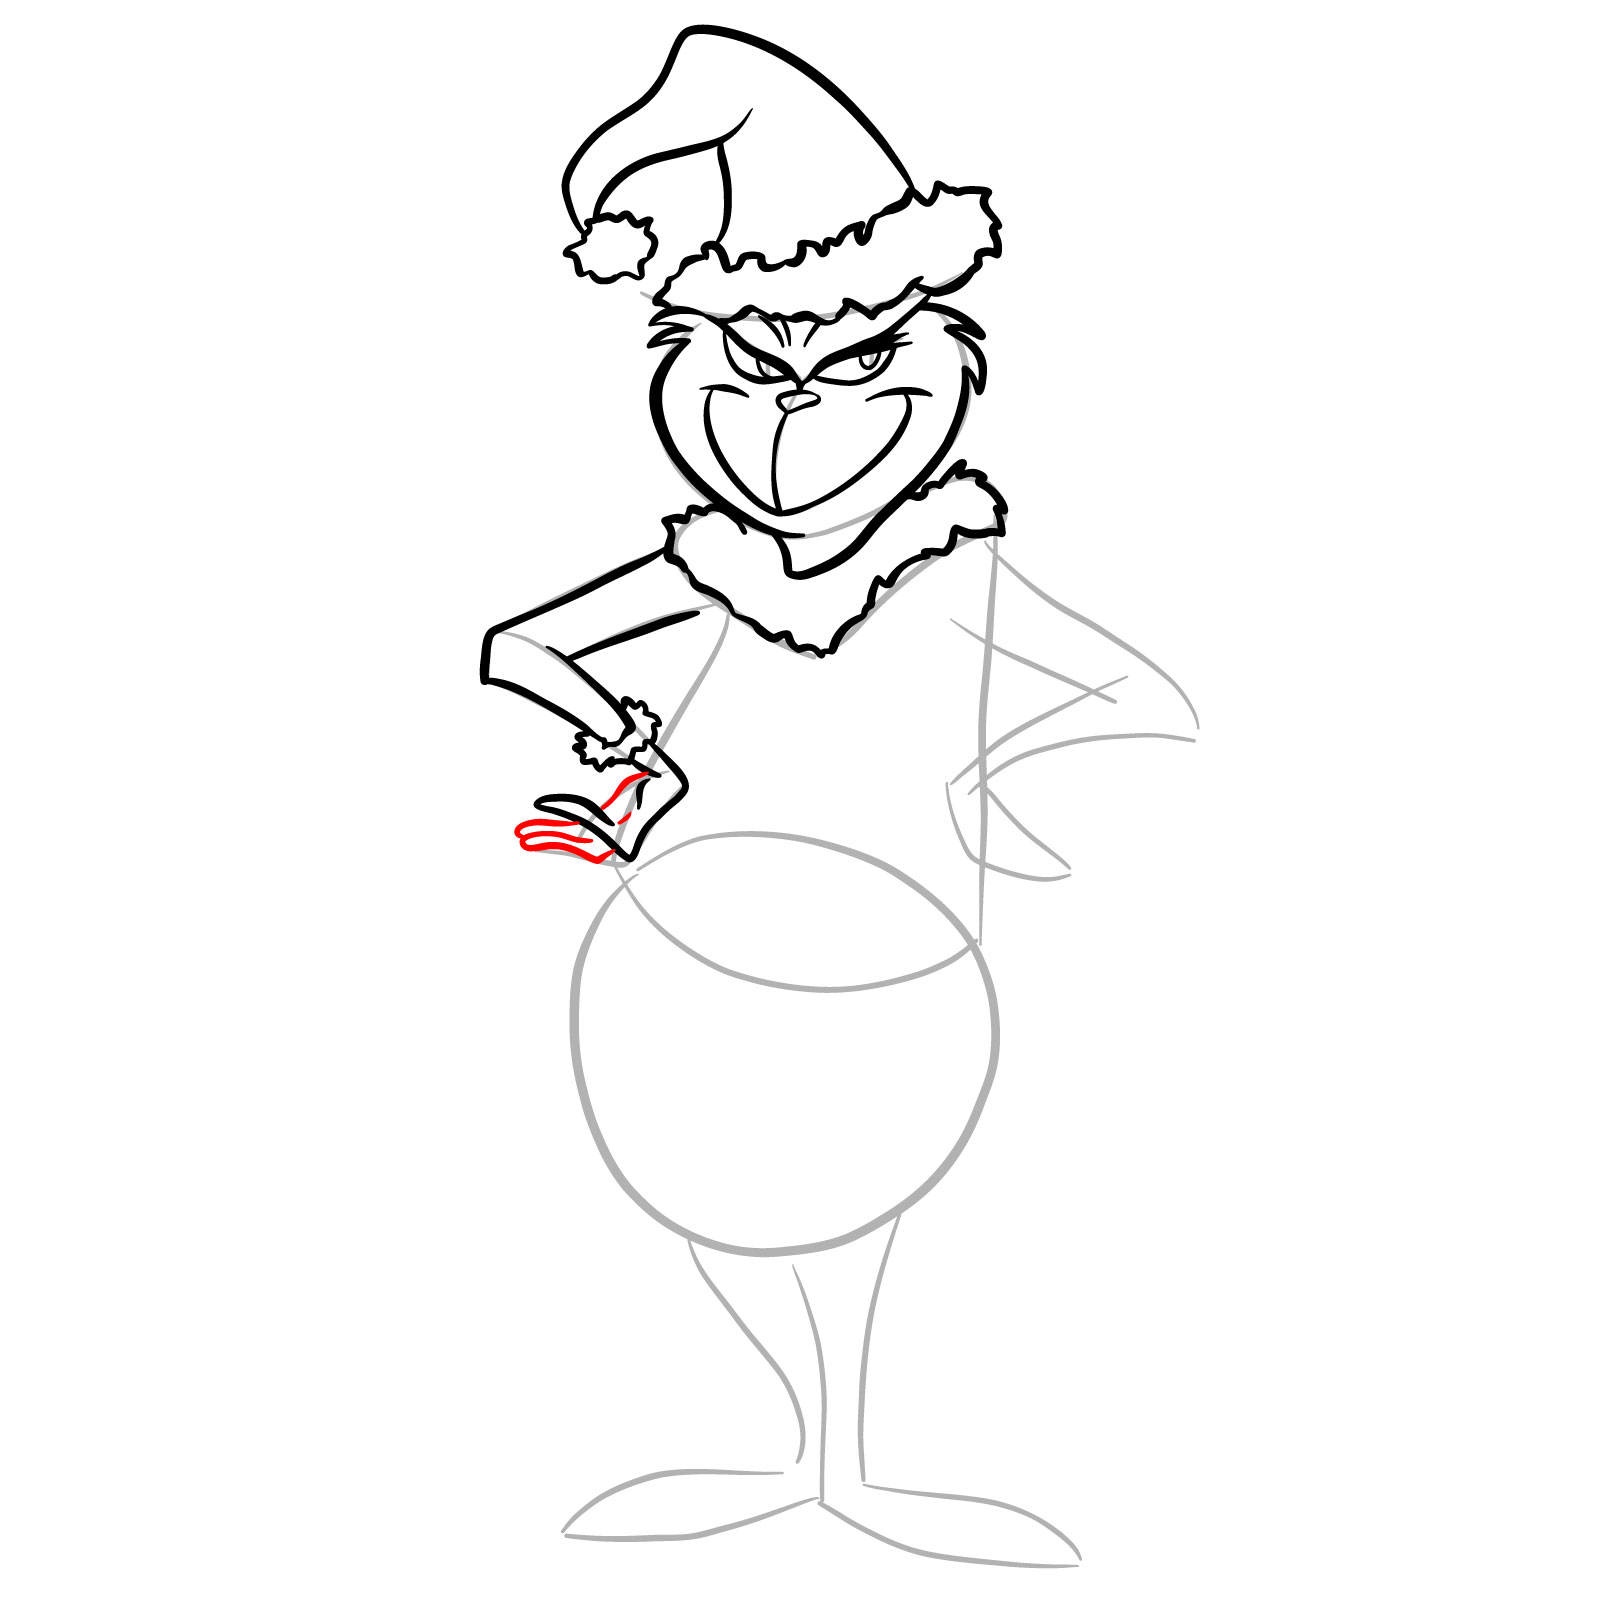 How to draw The Grinch in a Christmas costume - step 16